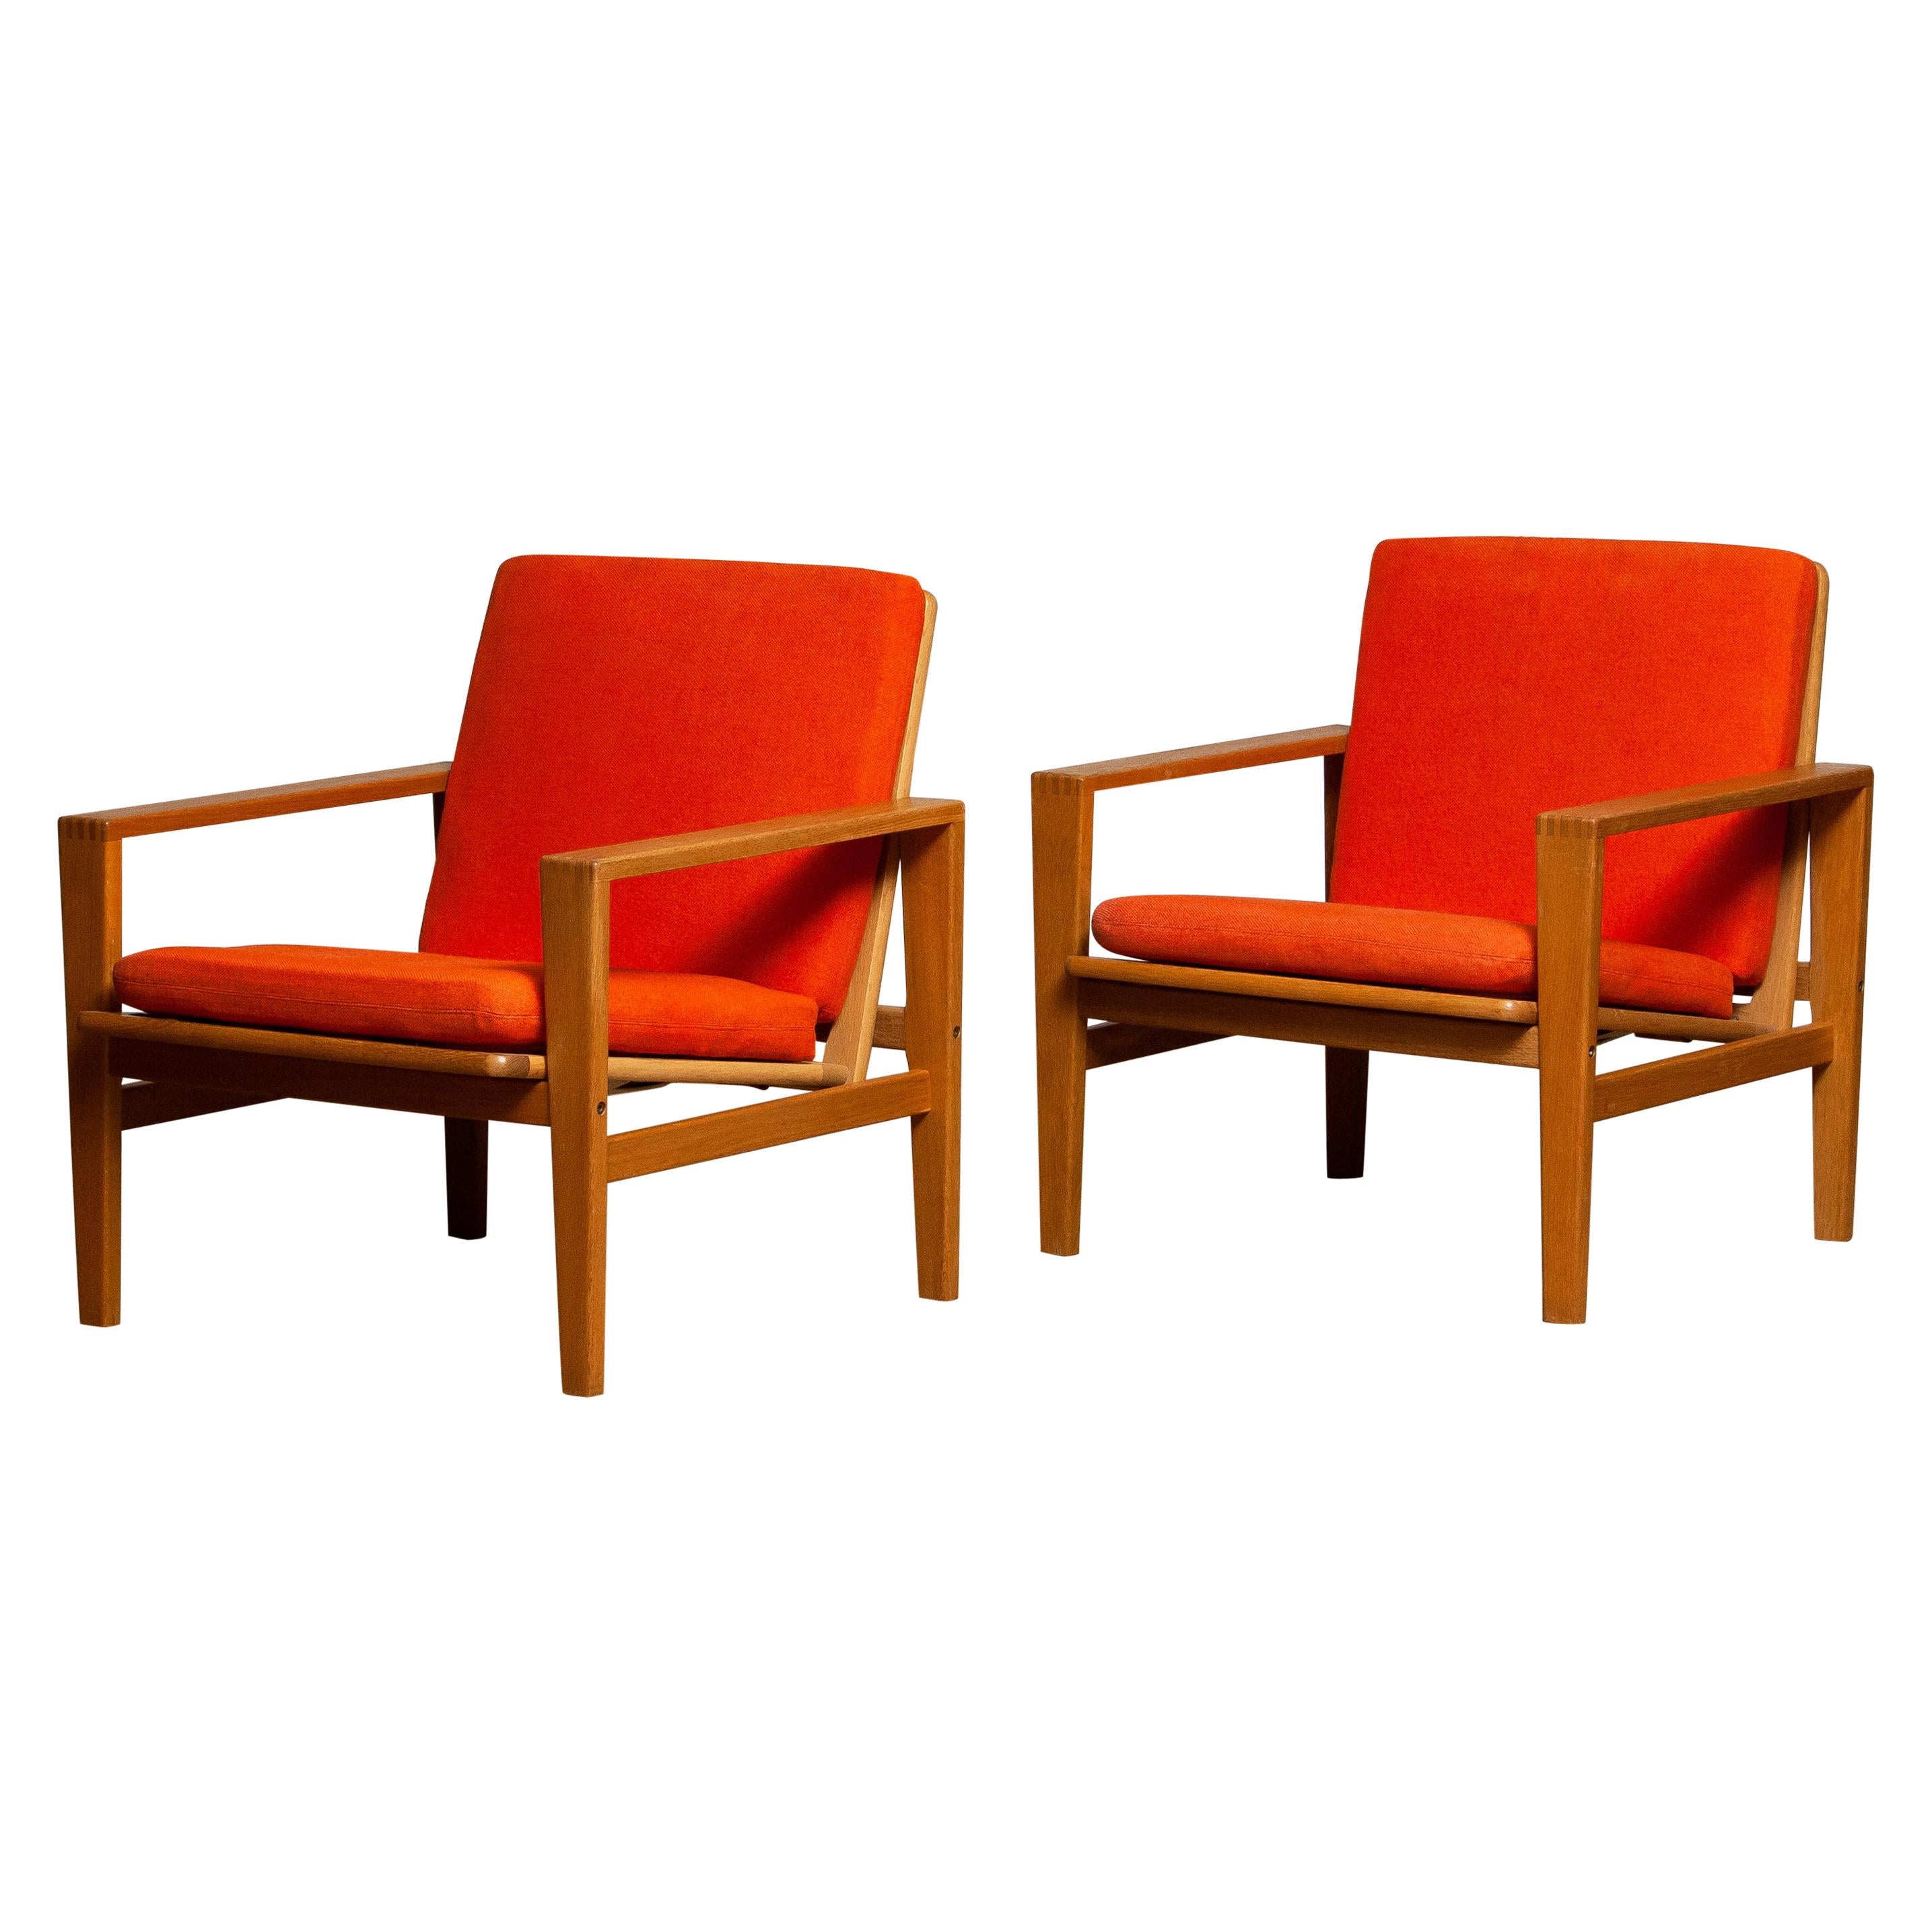 1960s Pair of Lounge / Easy Chairs in Oak Leather Fabric by Erik Merthen for Ire